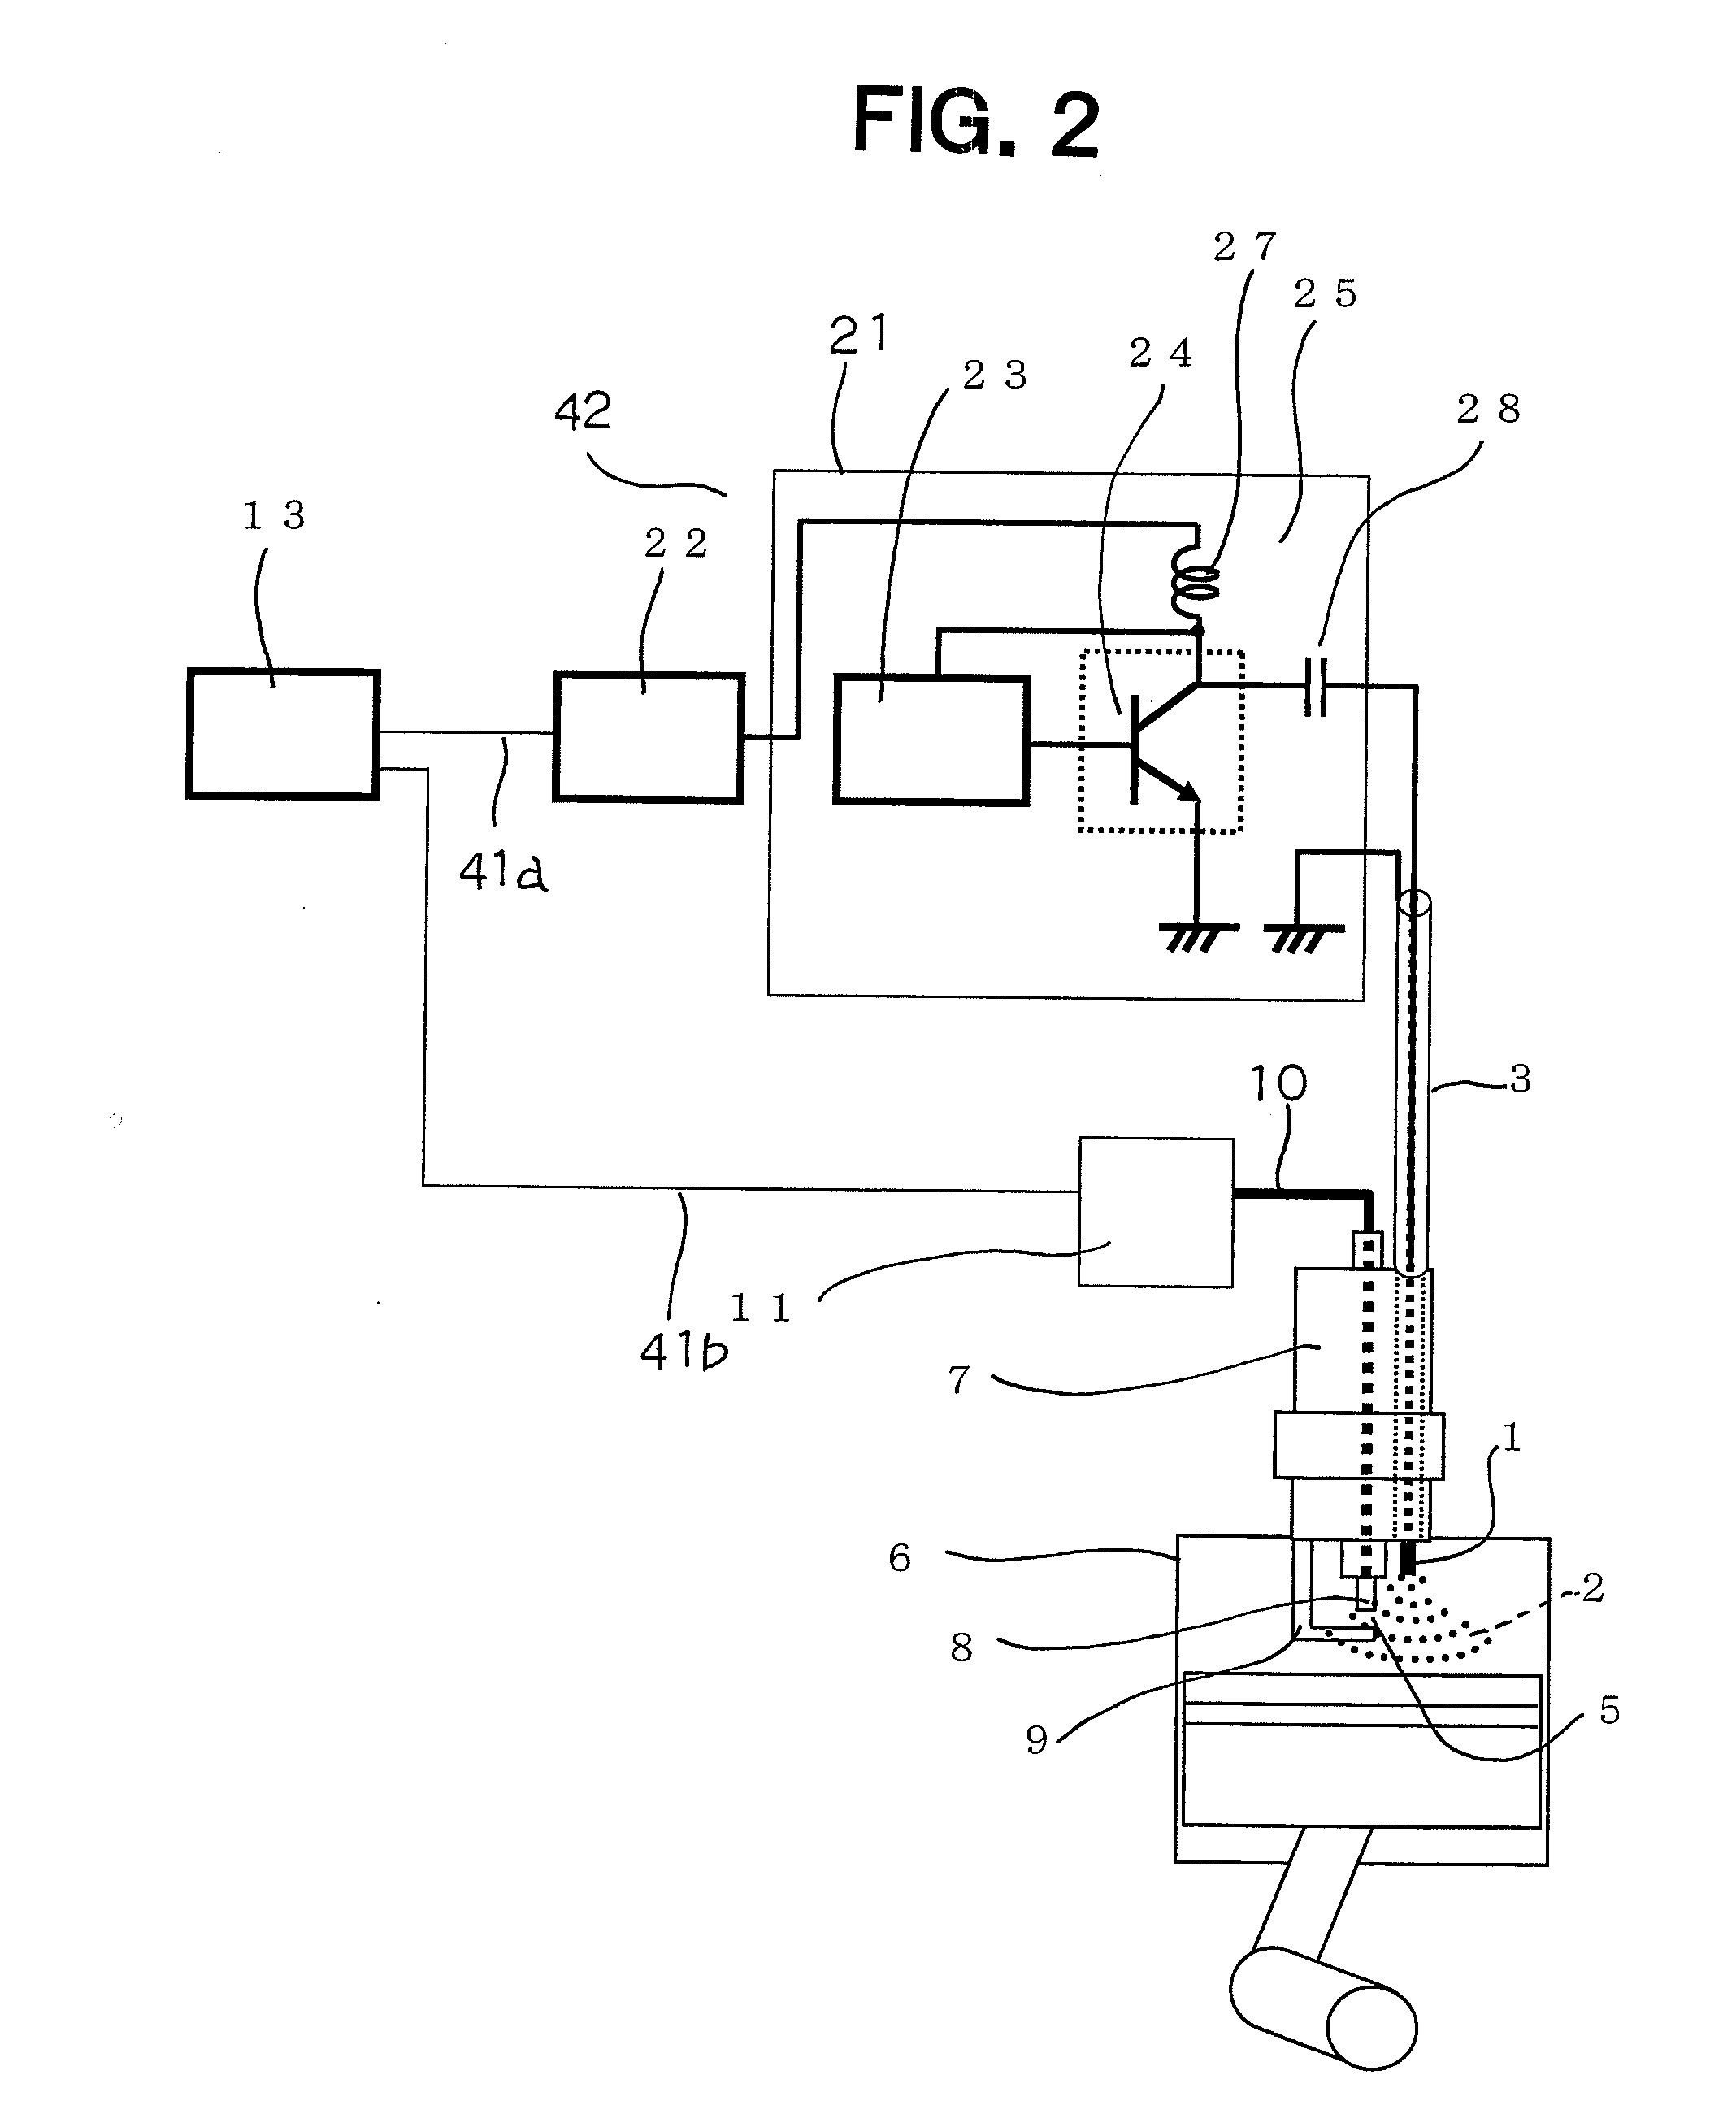 Ignition apparatus for an internal combustion engine